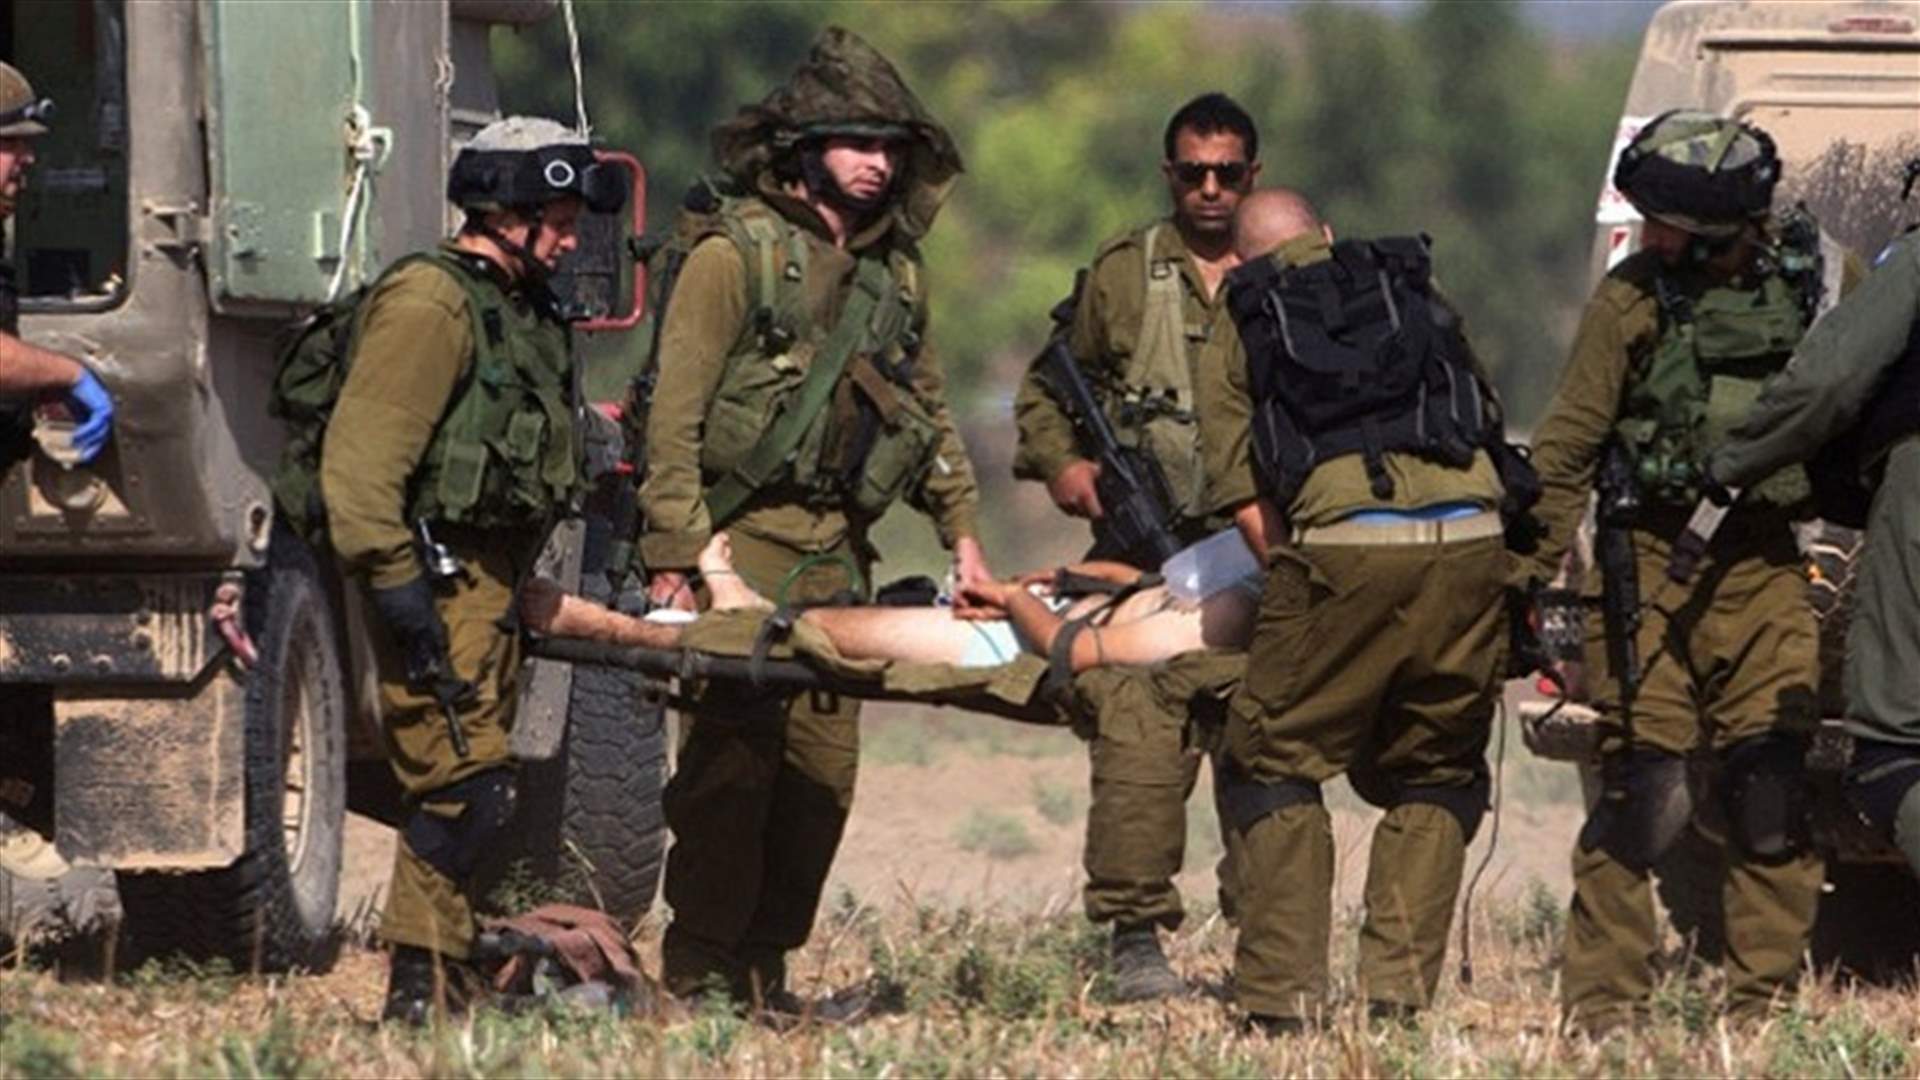 Israeli forces kill Palestinian who stabbed soldier - army